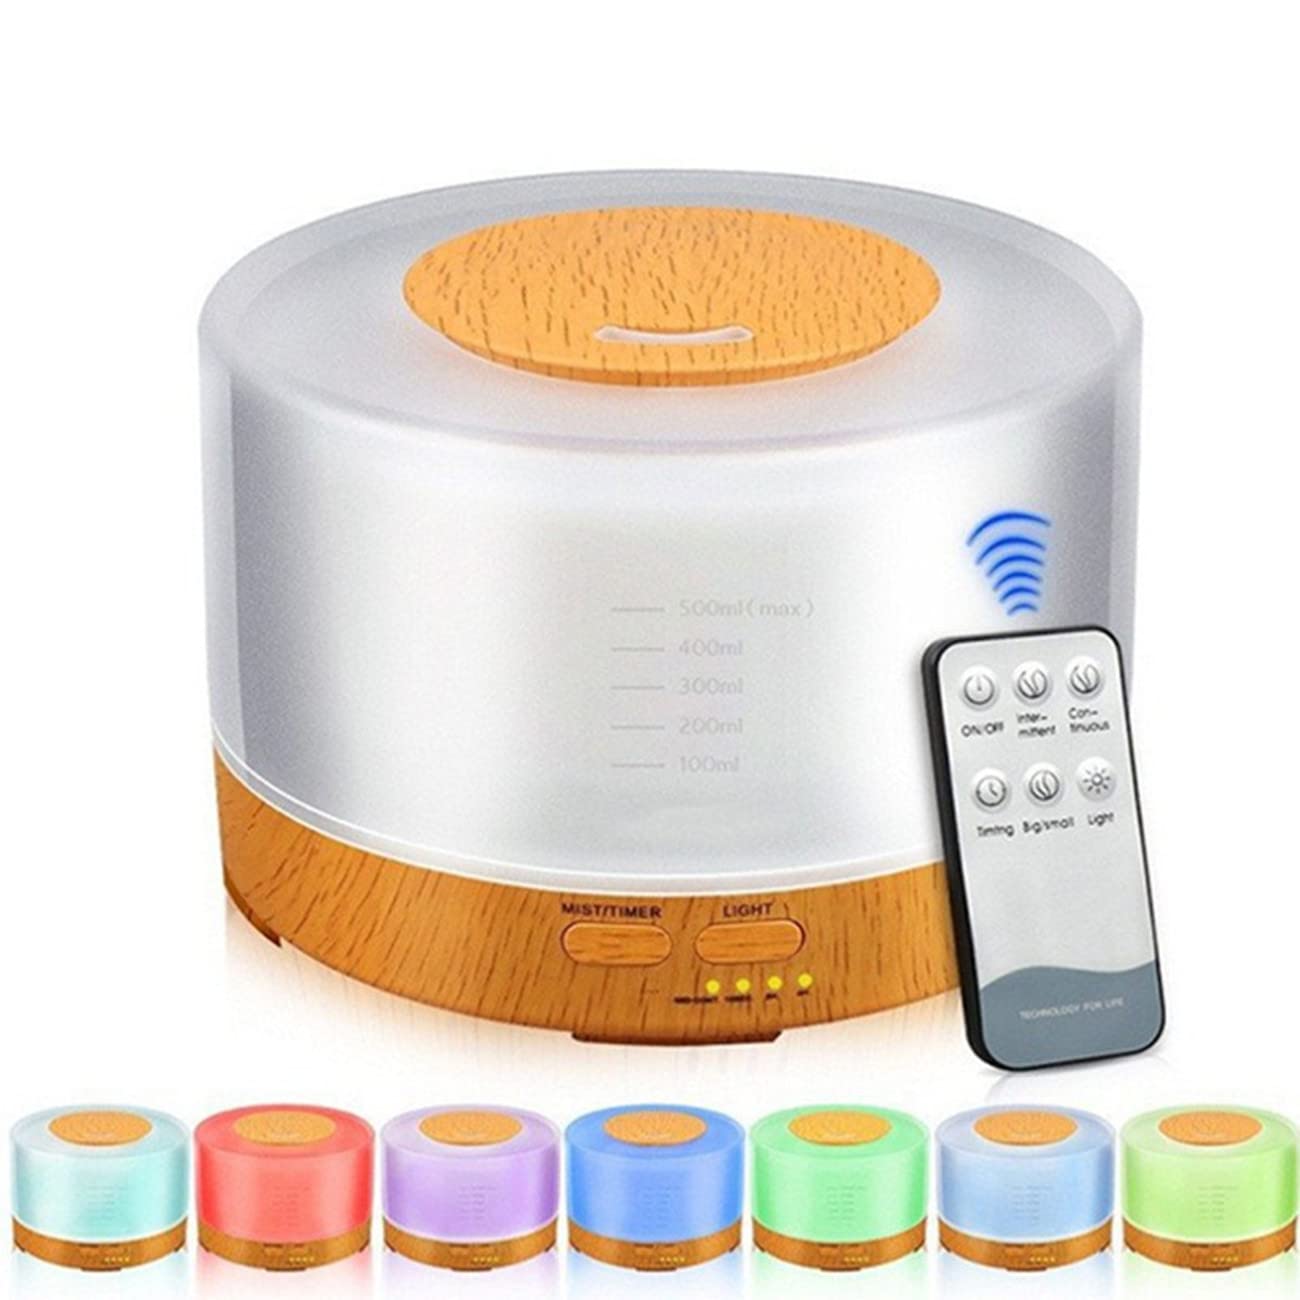 SKY-TOUCH Essential Oil Aroma Diffuser 700ml, Upgraded Aromatherapy Diffuser 7 Color Lights, Cool Mist Humidifier with Auto Shut-off Function, Diffuser for Home Bedroom Office